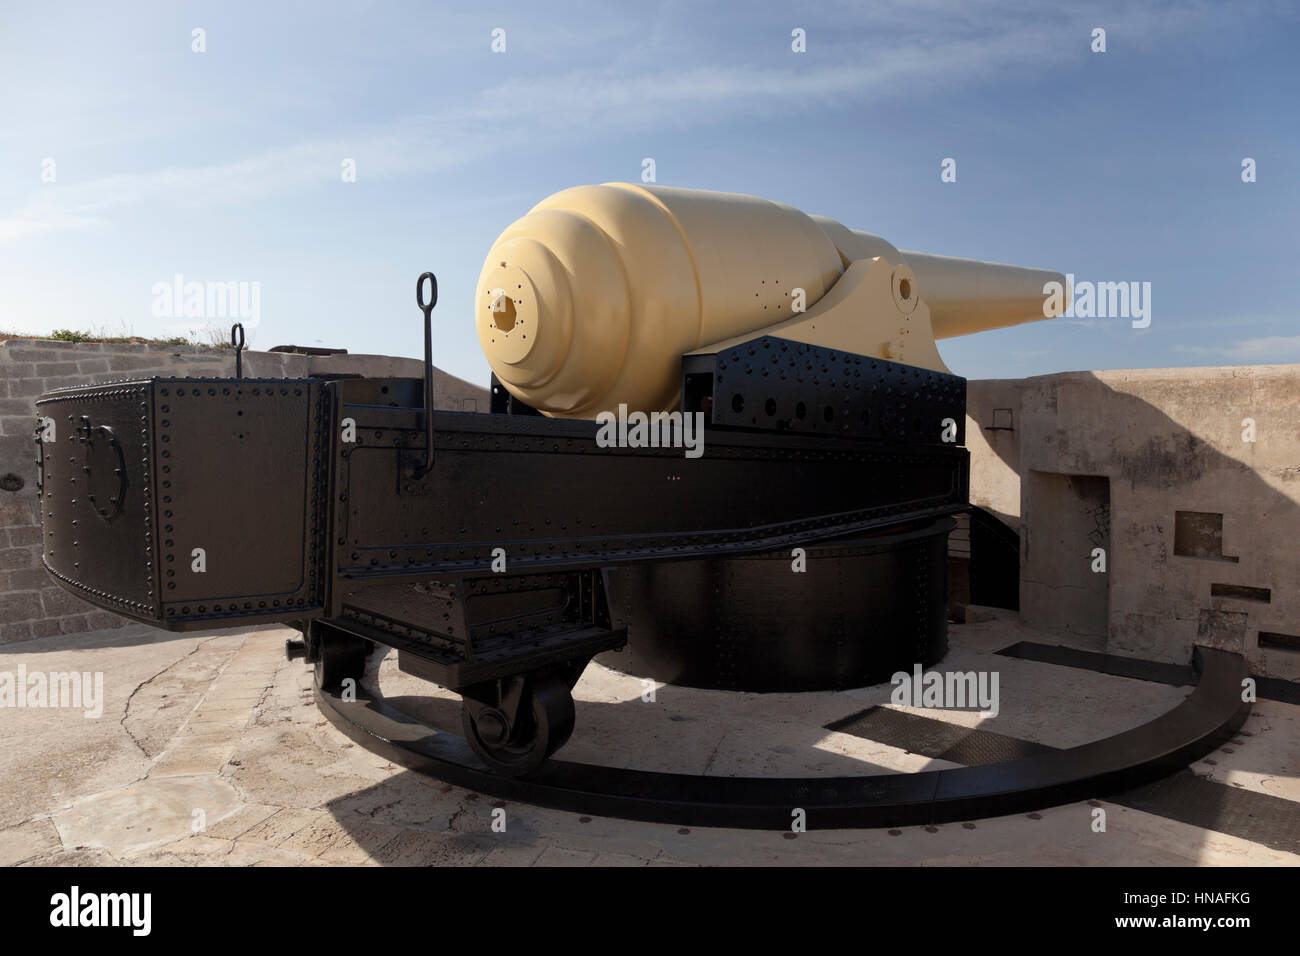 The Amrstrong 100-ton gun at Fort Rinella in Malta was designed to guard the sea routes into the Grand Harbour. Stock Photo